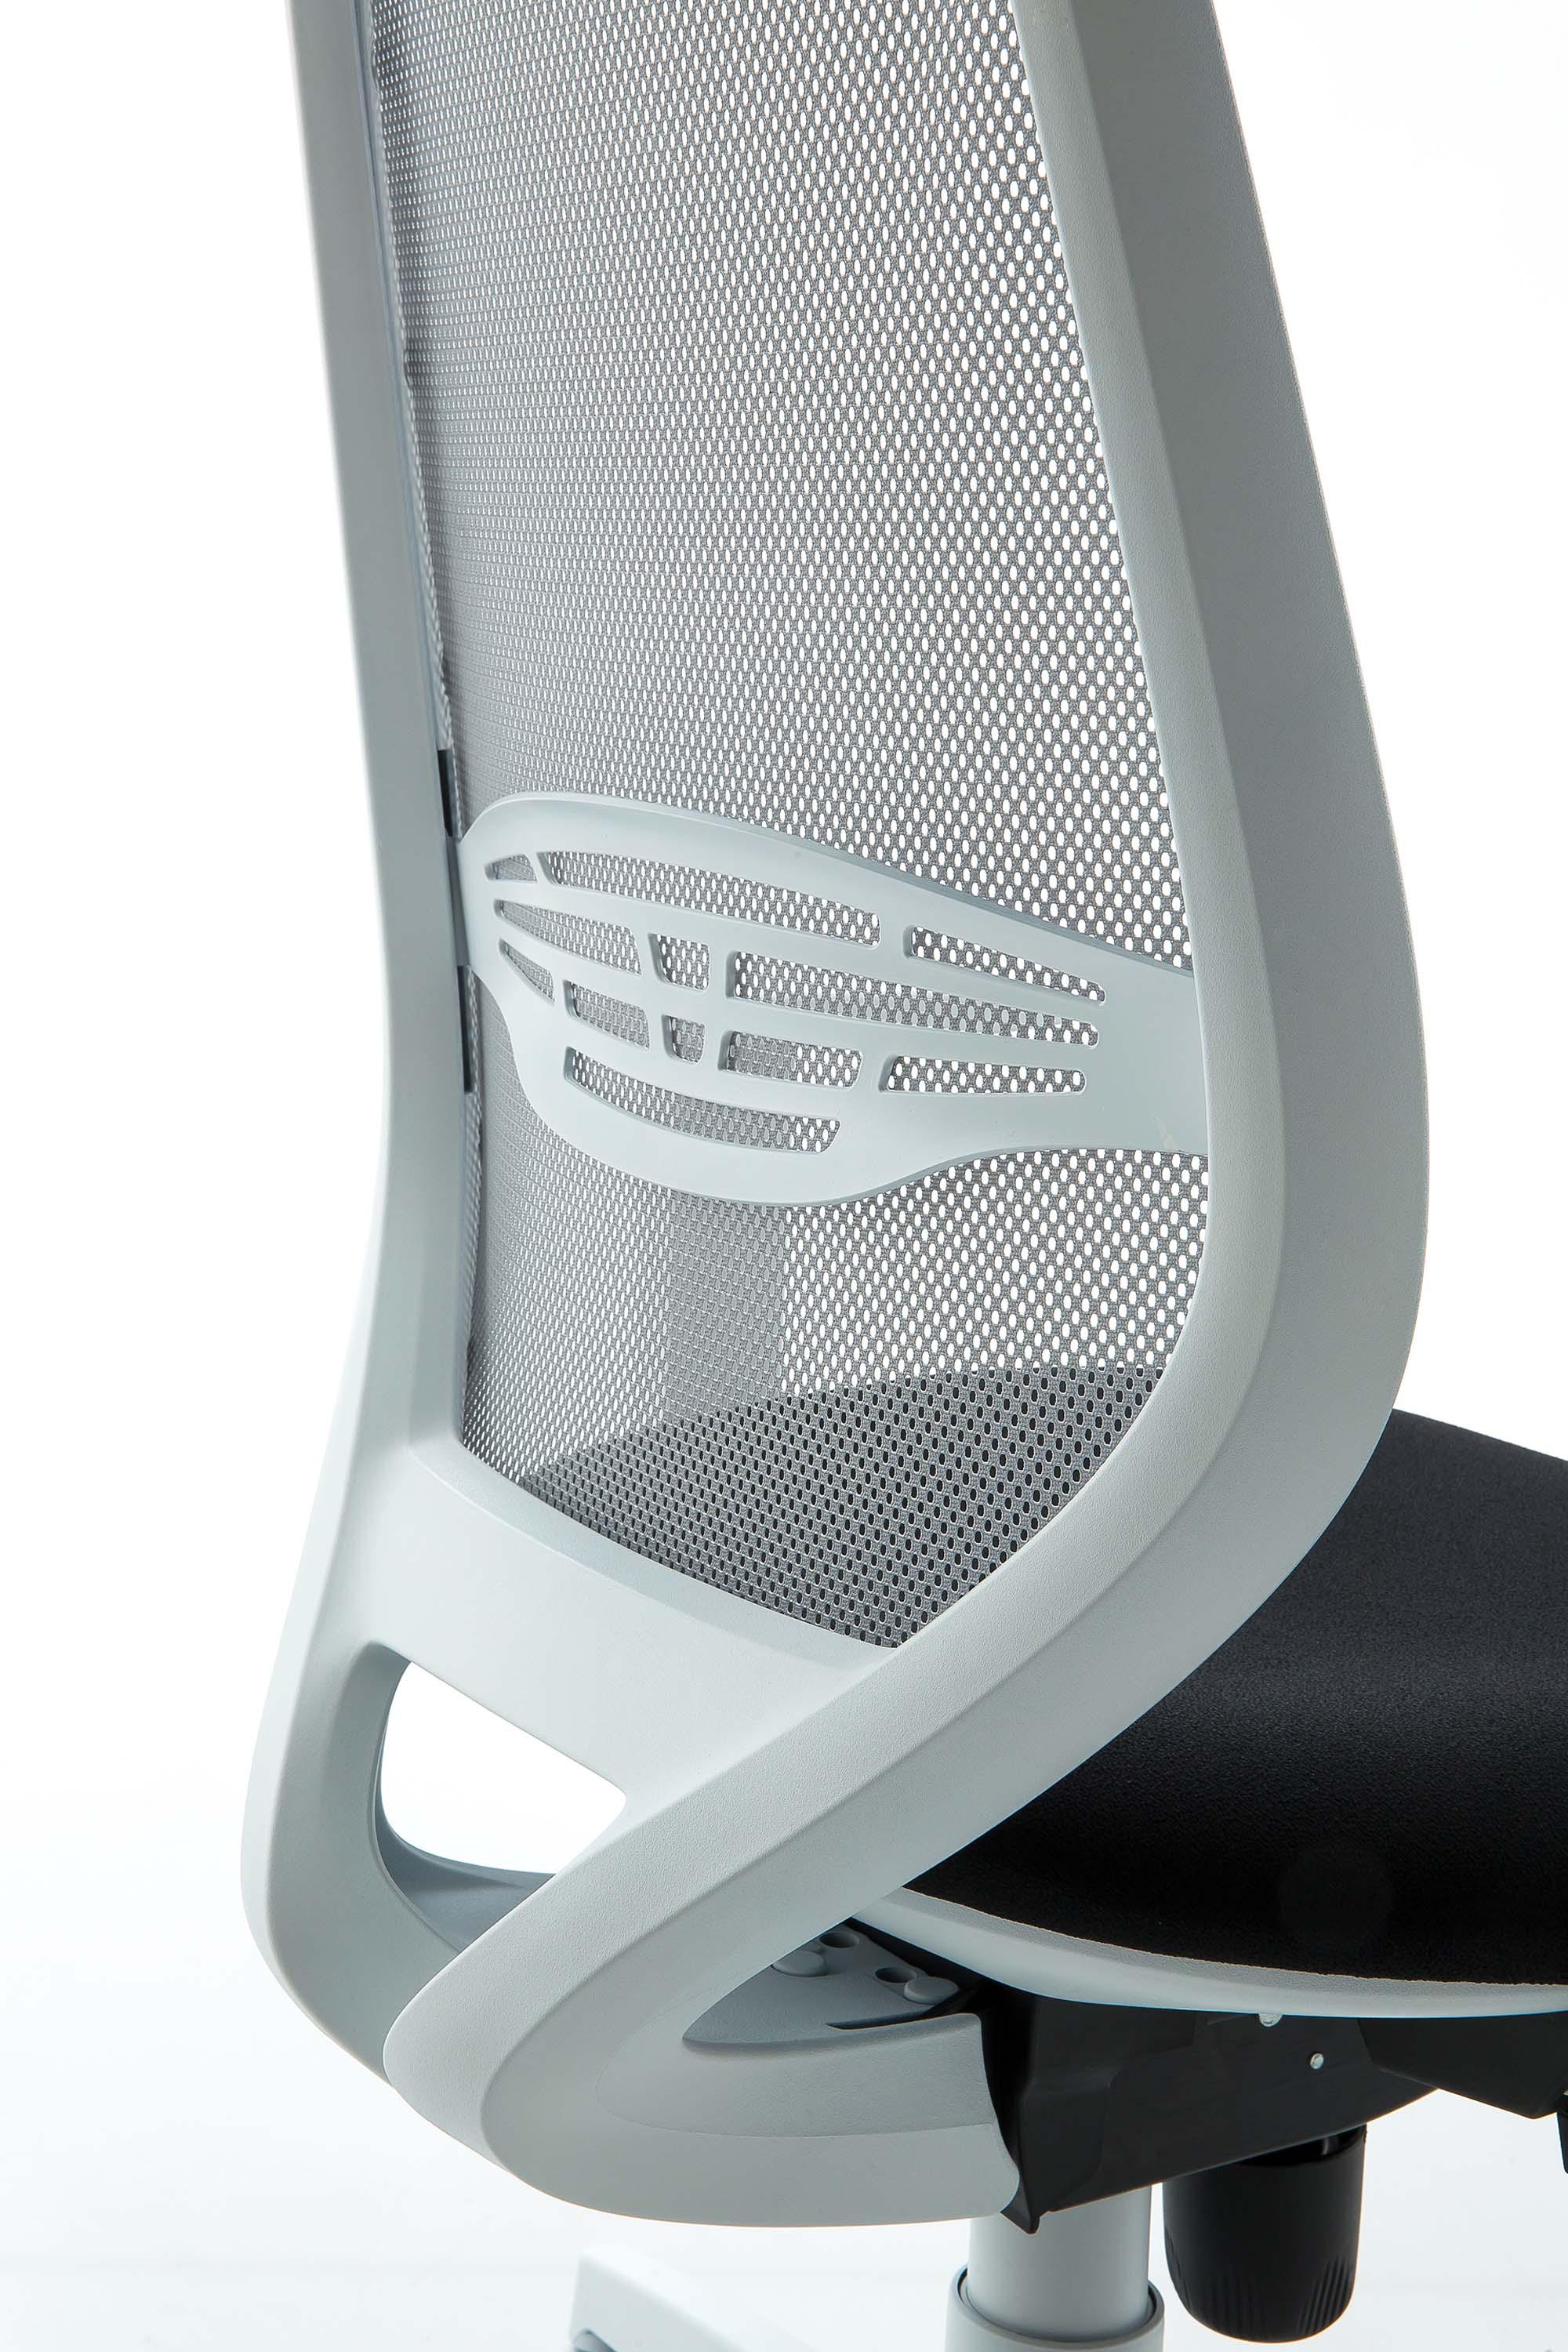 POST 10 5-6 - Office chairs from Luxy | Architonic